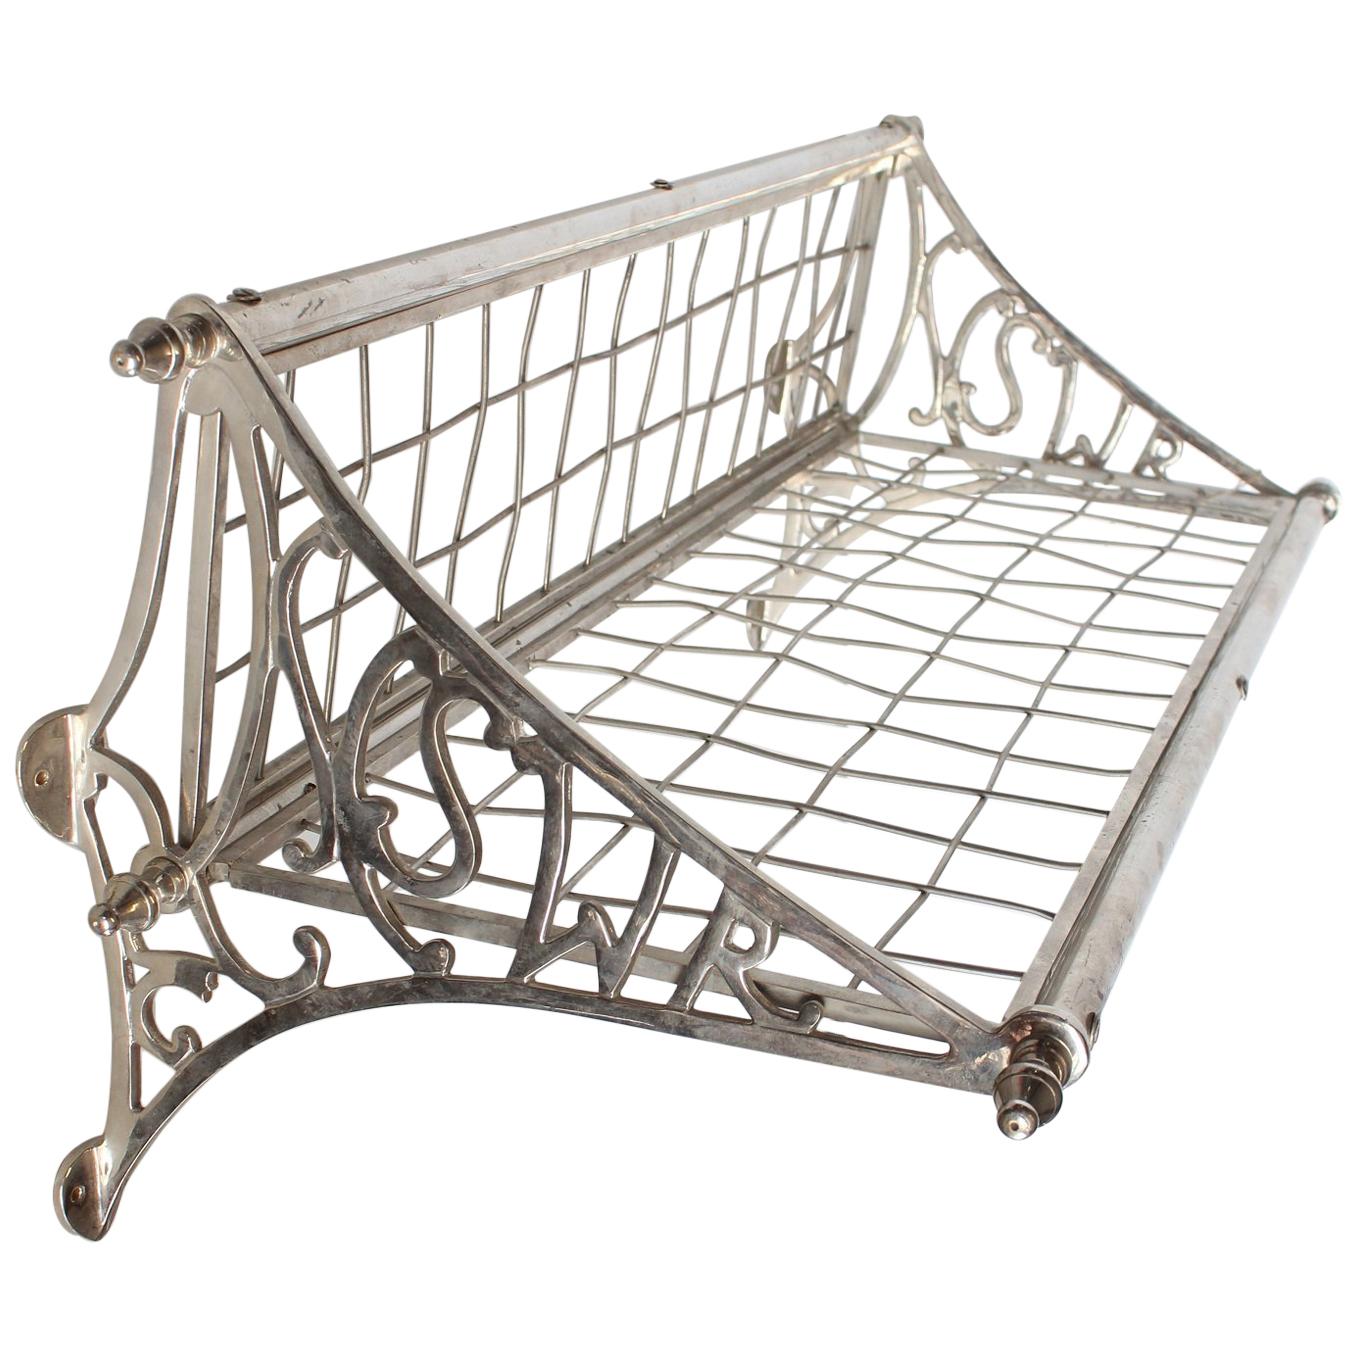 Antique Pullman Train Nickel Luggage Rack For Sale